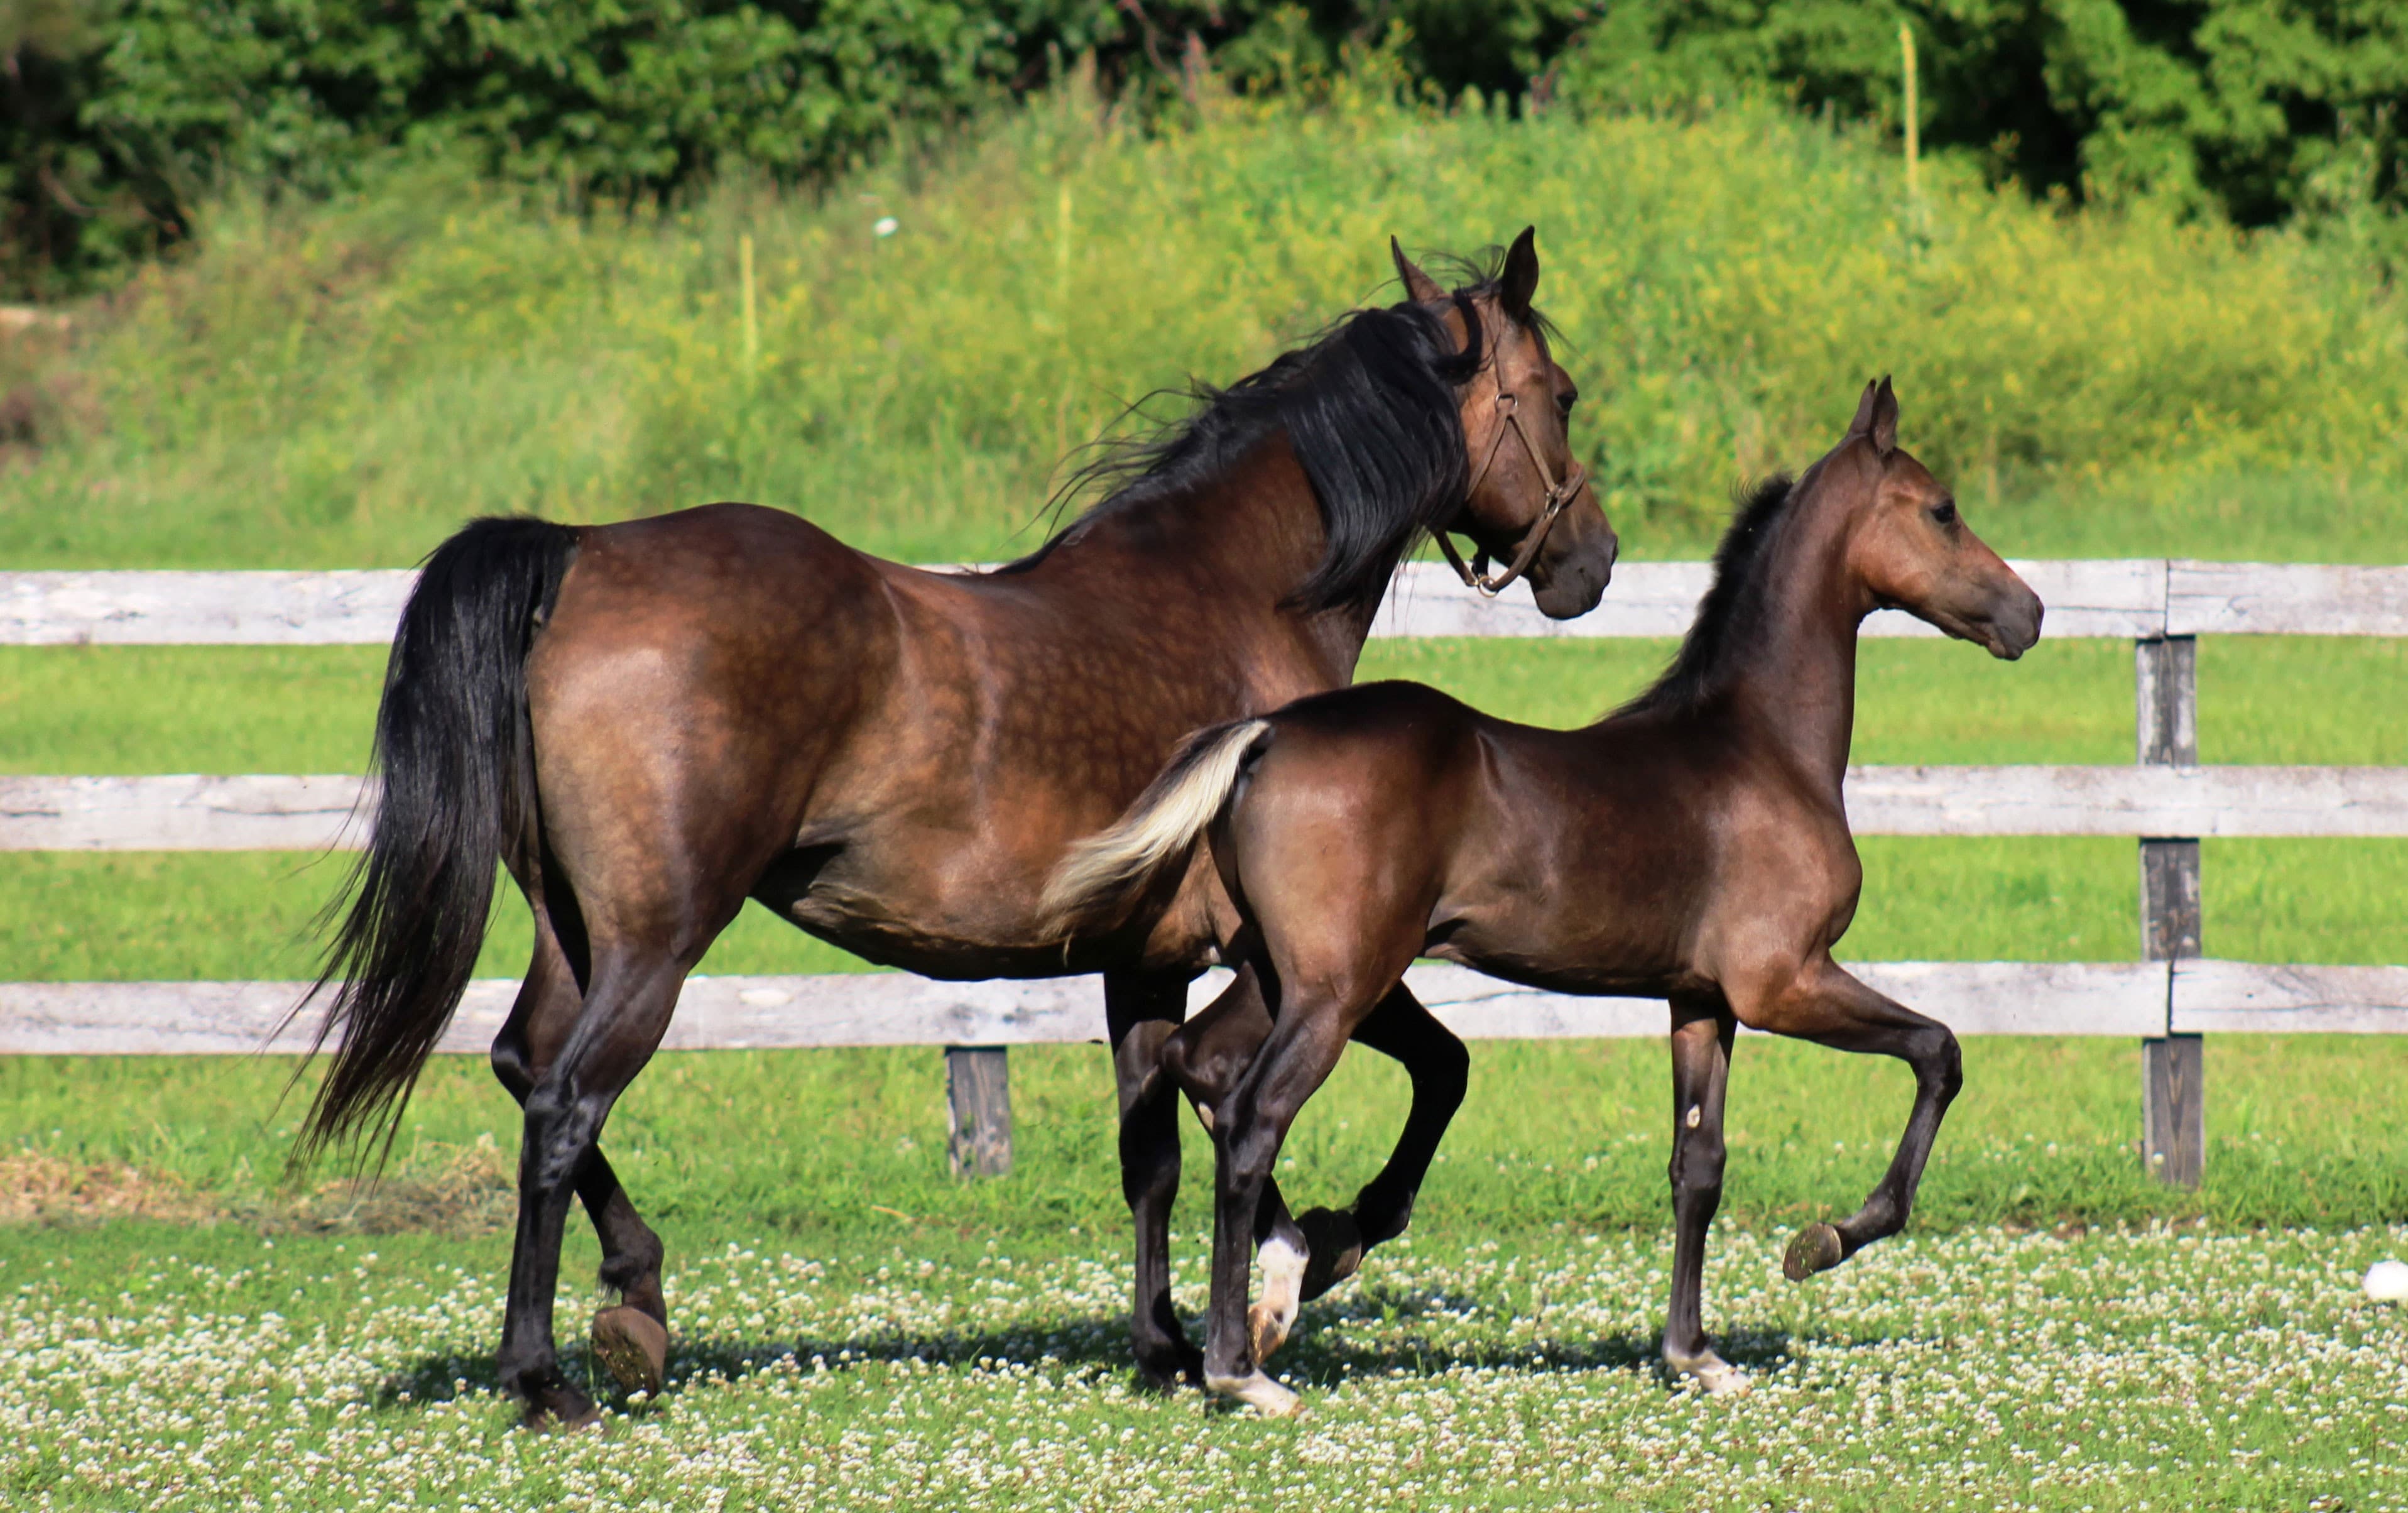 Adult And Young Horse Running